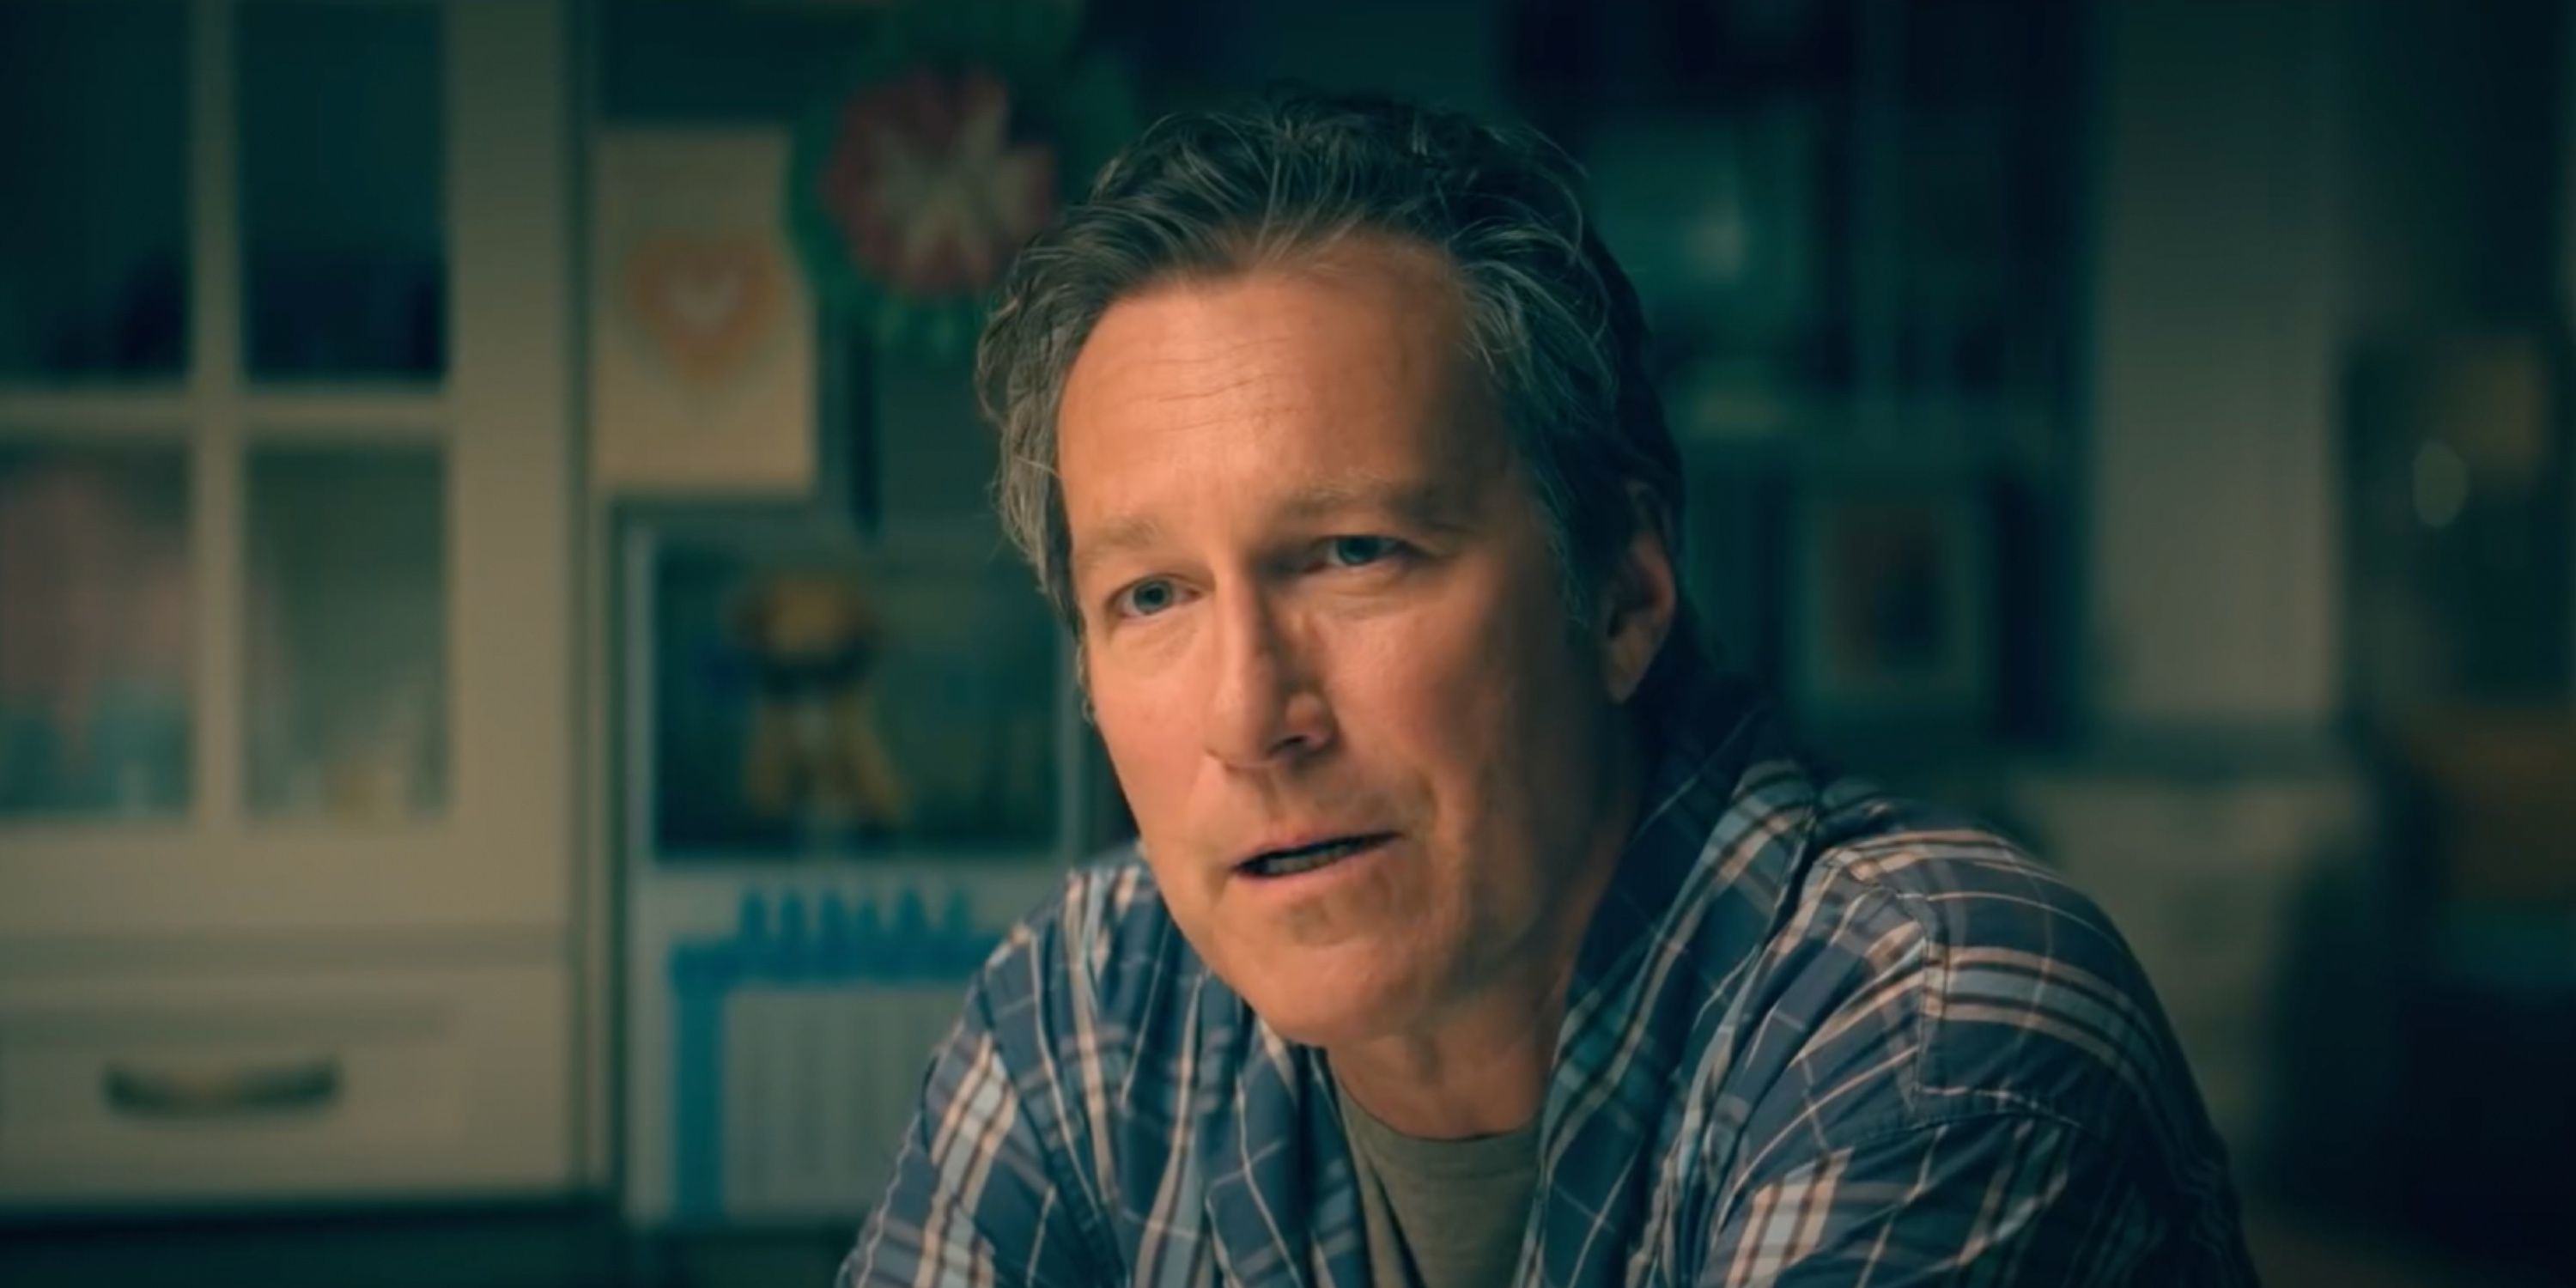 John Corbett in To All the Boys: Always and Forever on Netflix